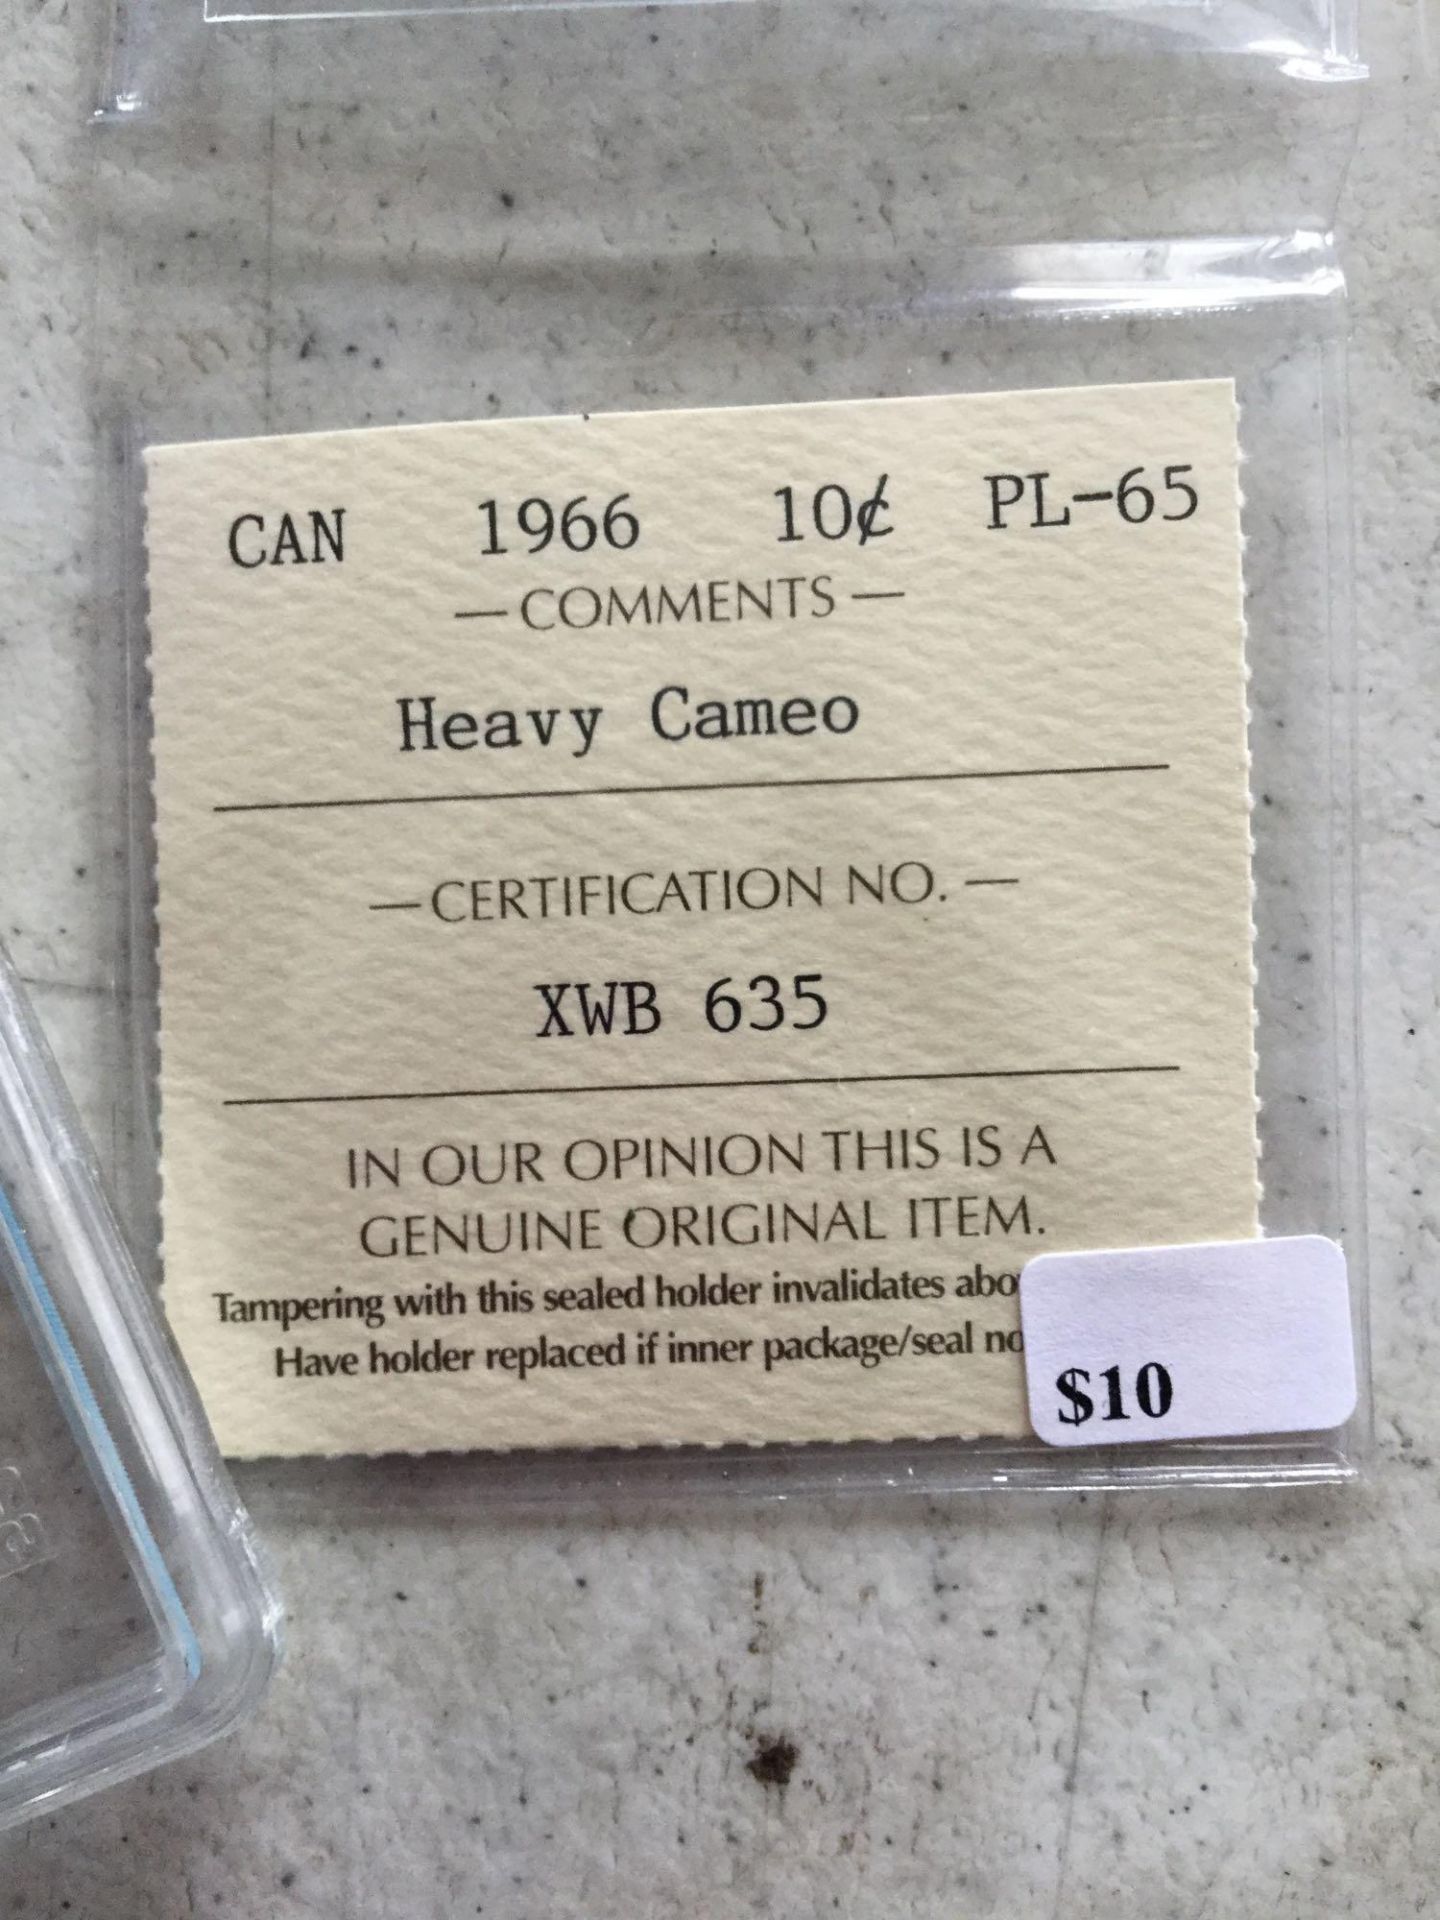 Canada 1966 10 Cent Coin PL-65 Heavy Cameo - Image 2 of 4